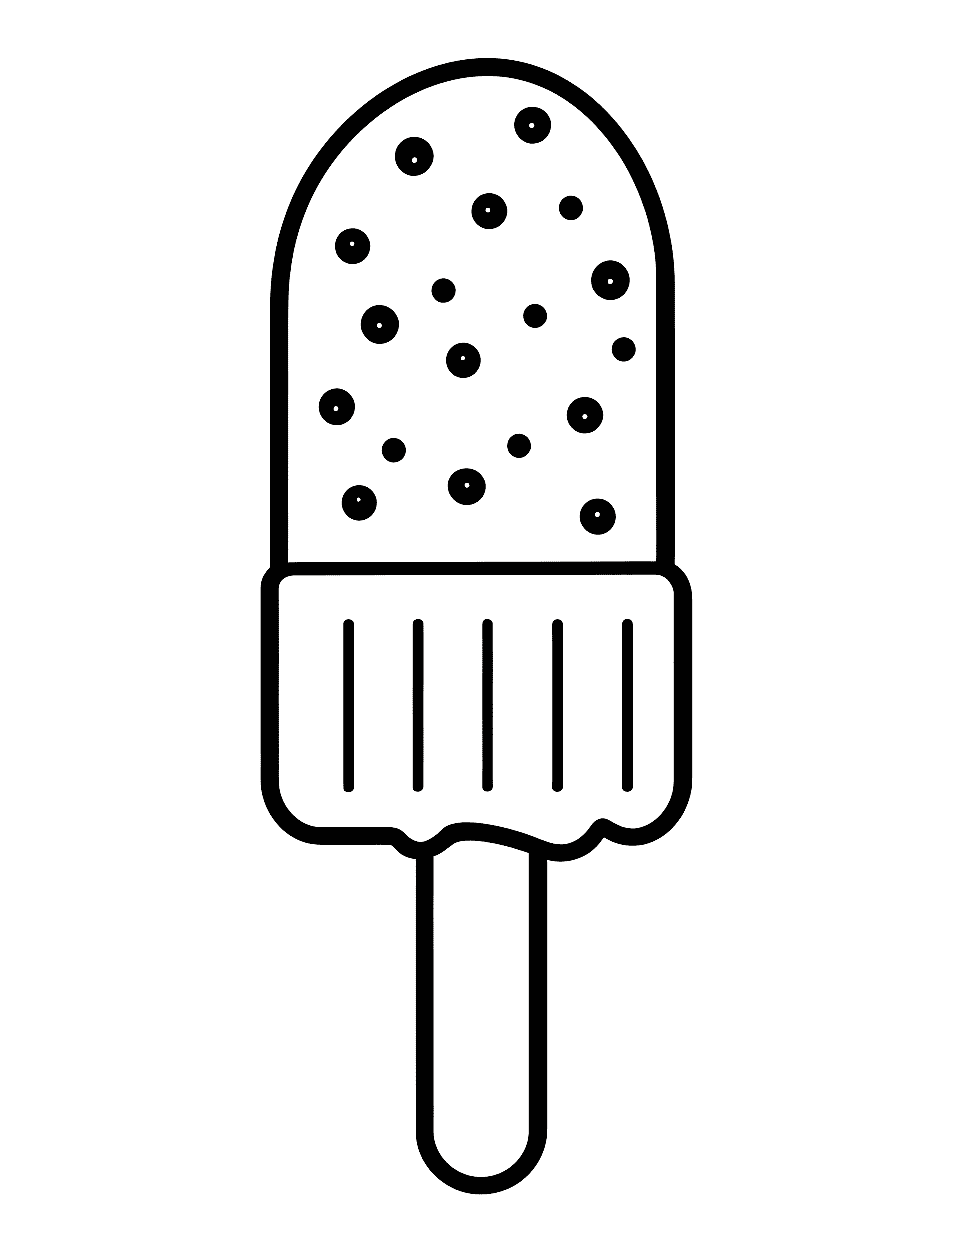 Easy Ice Cream Stick Coloring Page - A simple and easy-to-color popsicle, perfect for preschool kids.